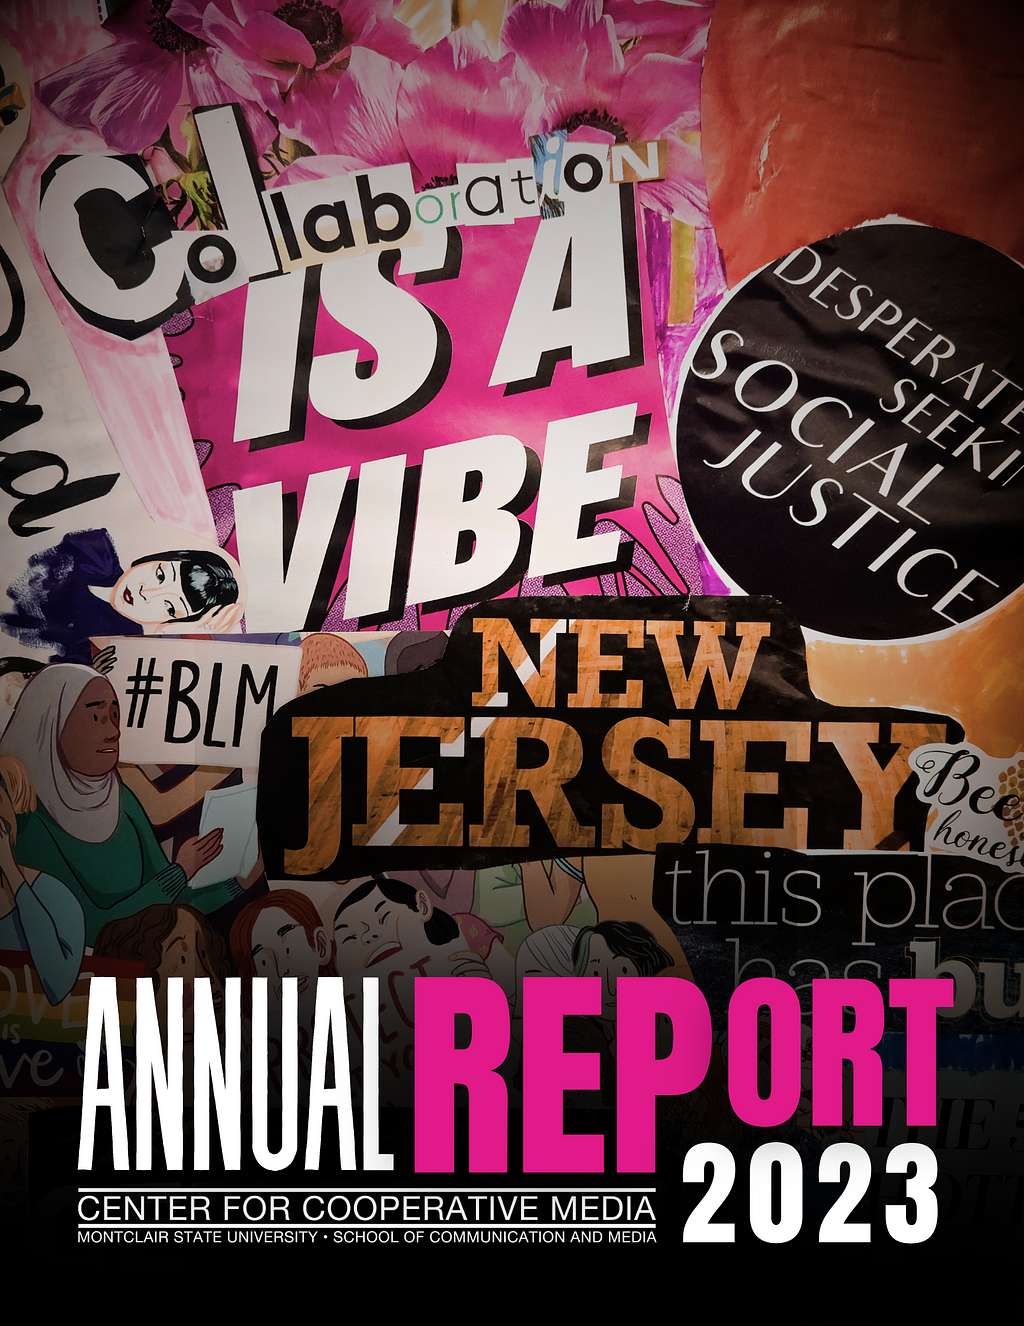 Cover page for the Center for Cooperative Media at Montclair State University’s Annual Report 2023. It features a vibrant collage of images and text, emphasizing community and social justice. Key phrases like ‘Collaboration is a VIBE,’ ‘#BLM,’ ‘Desperately Seeking Social Justice,’ and ‘New Jersey’ stand out in bold letters against a backdrop of illustrations and photographs that represent activism and diversity.